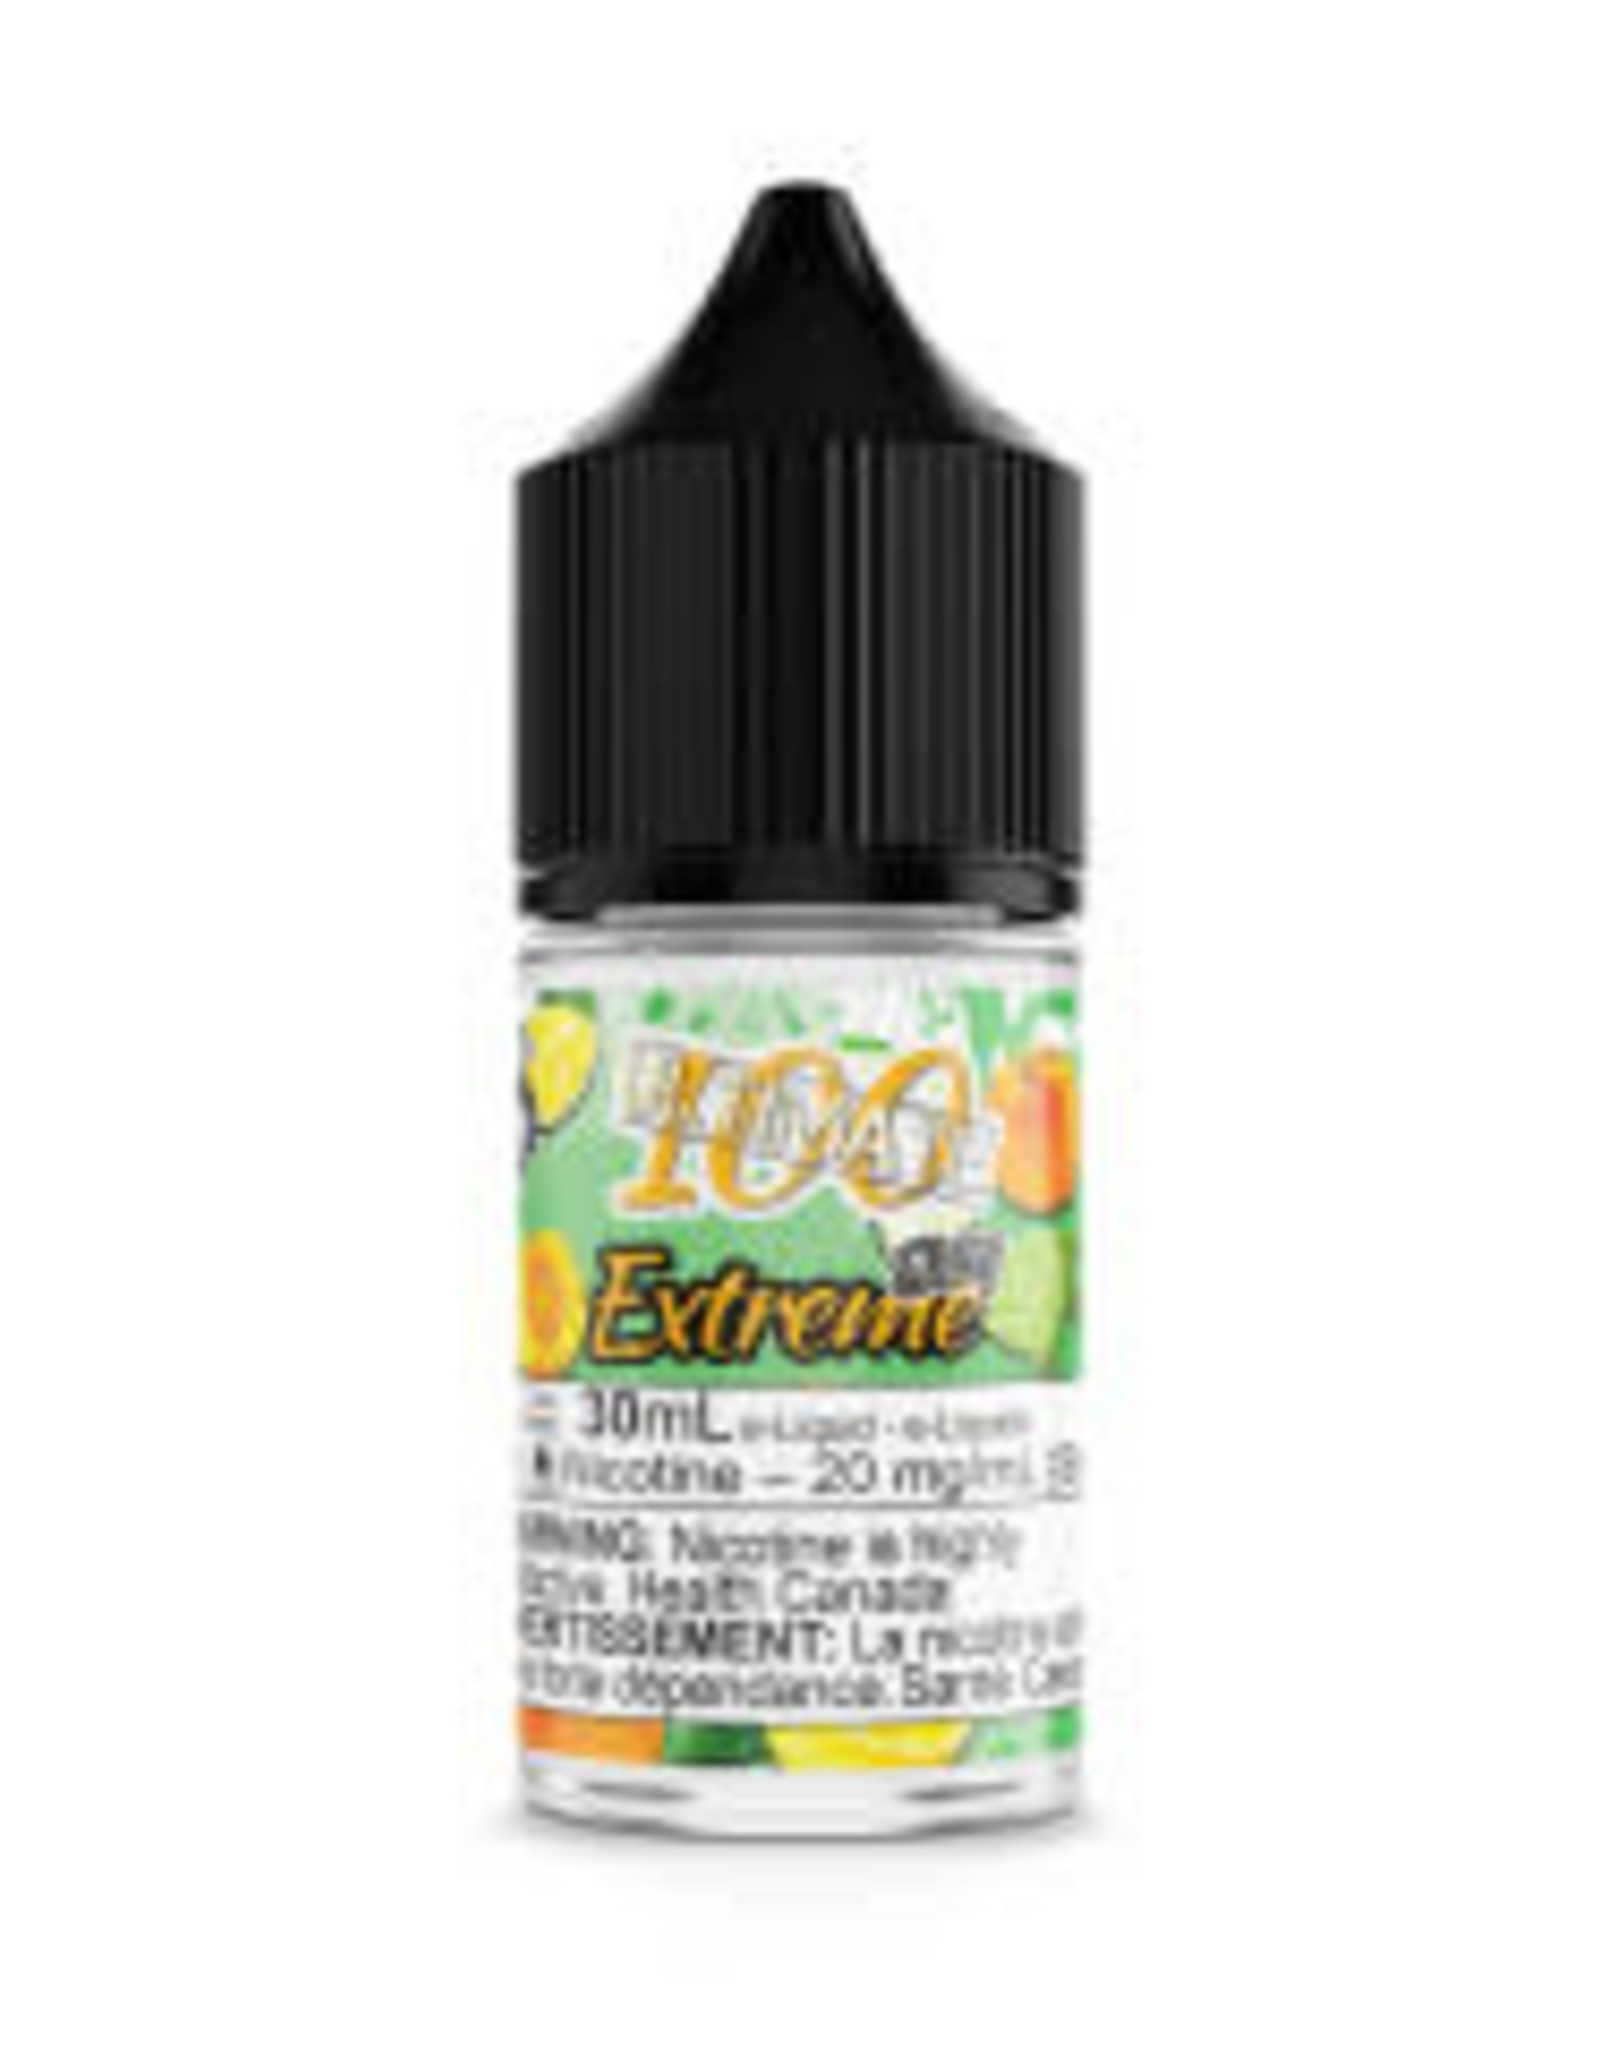 Ultimate 100 EXCISE 30ml Ultimate 100 Salt - Extreme